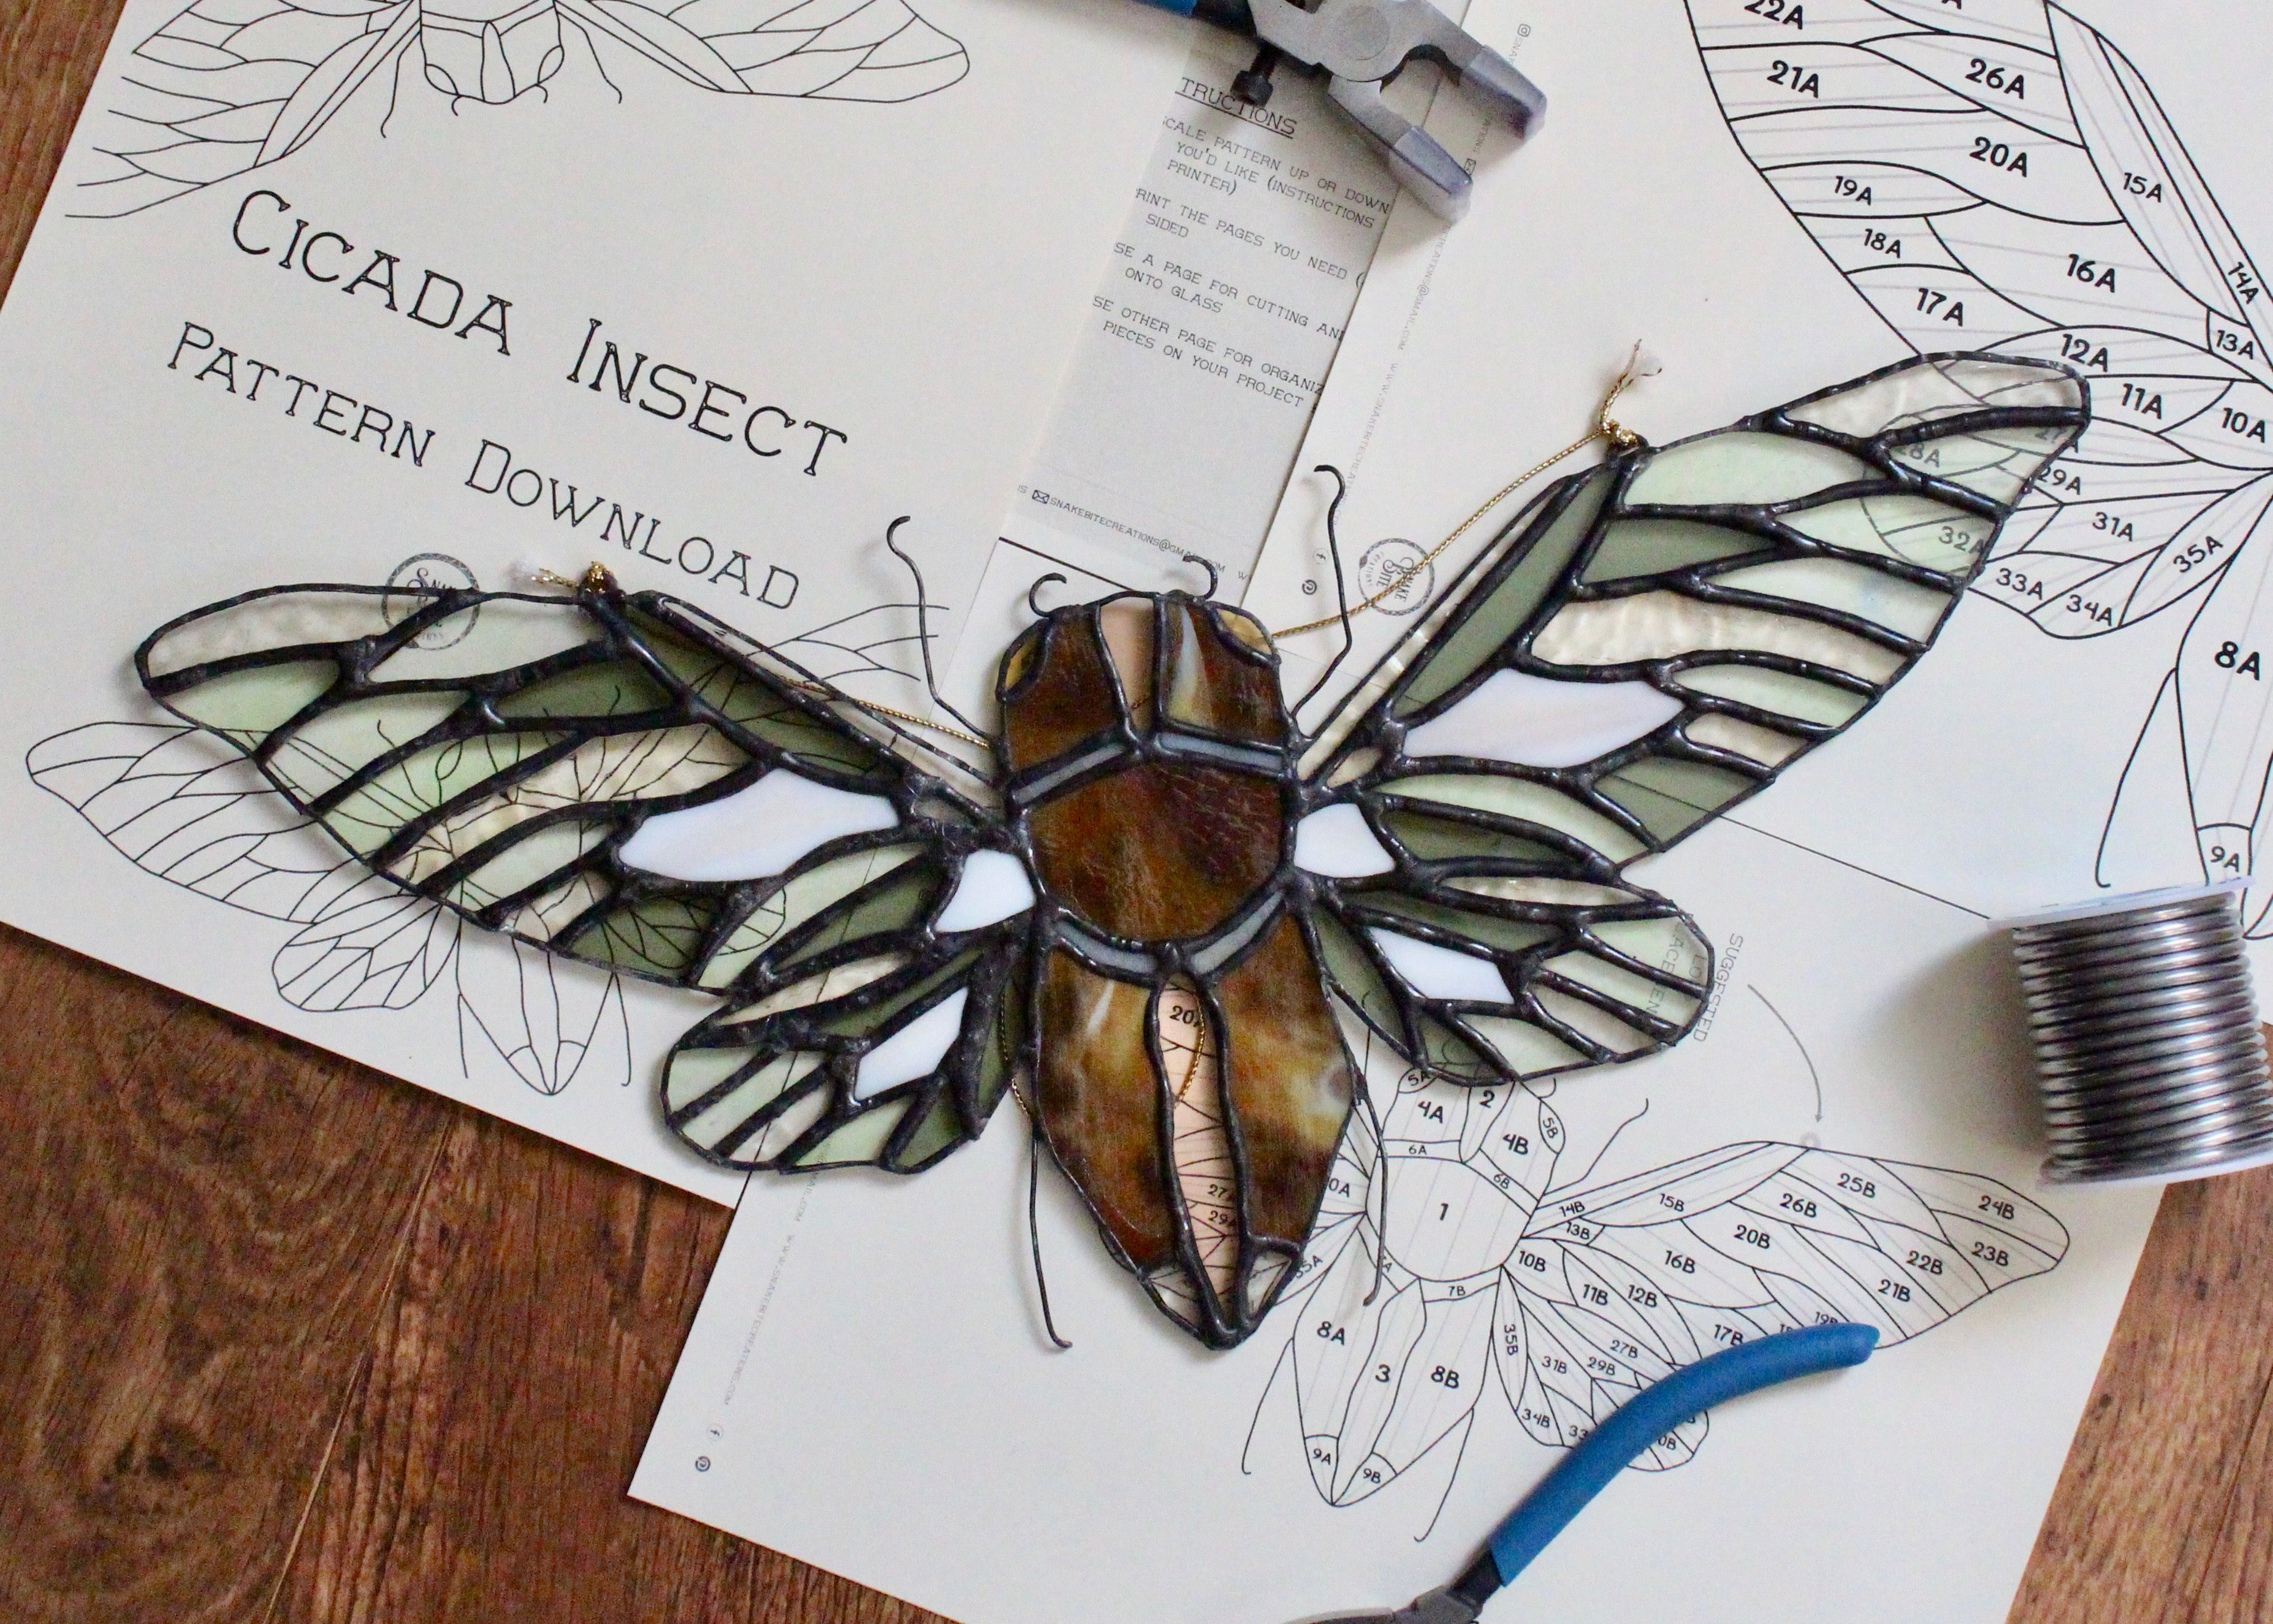 Stained Glass Pattern: Cicada Insect pdf